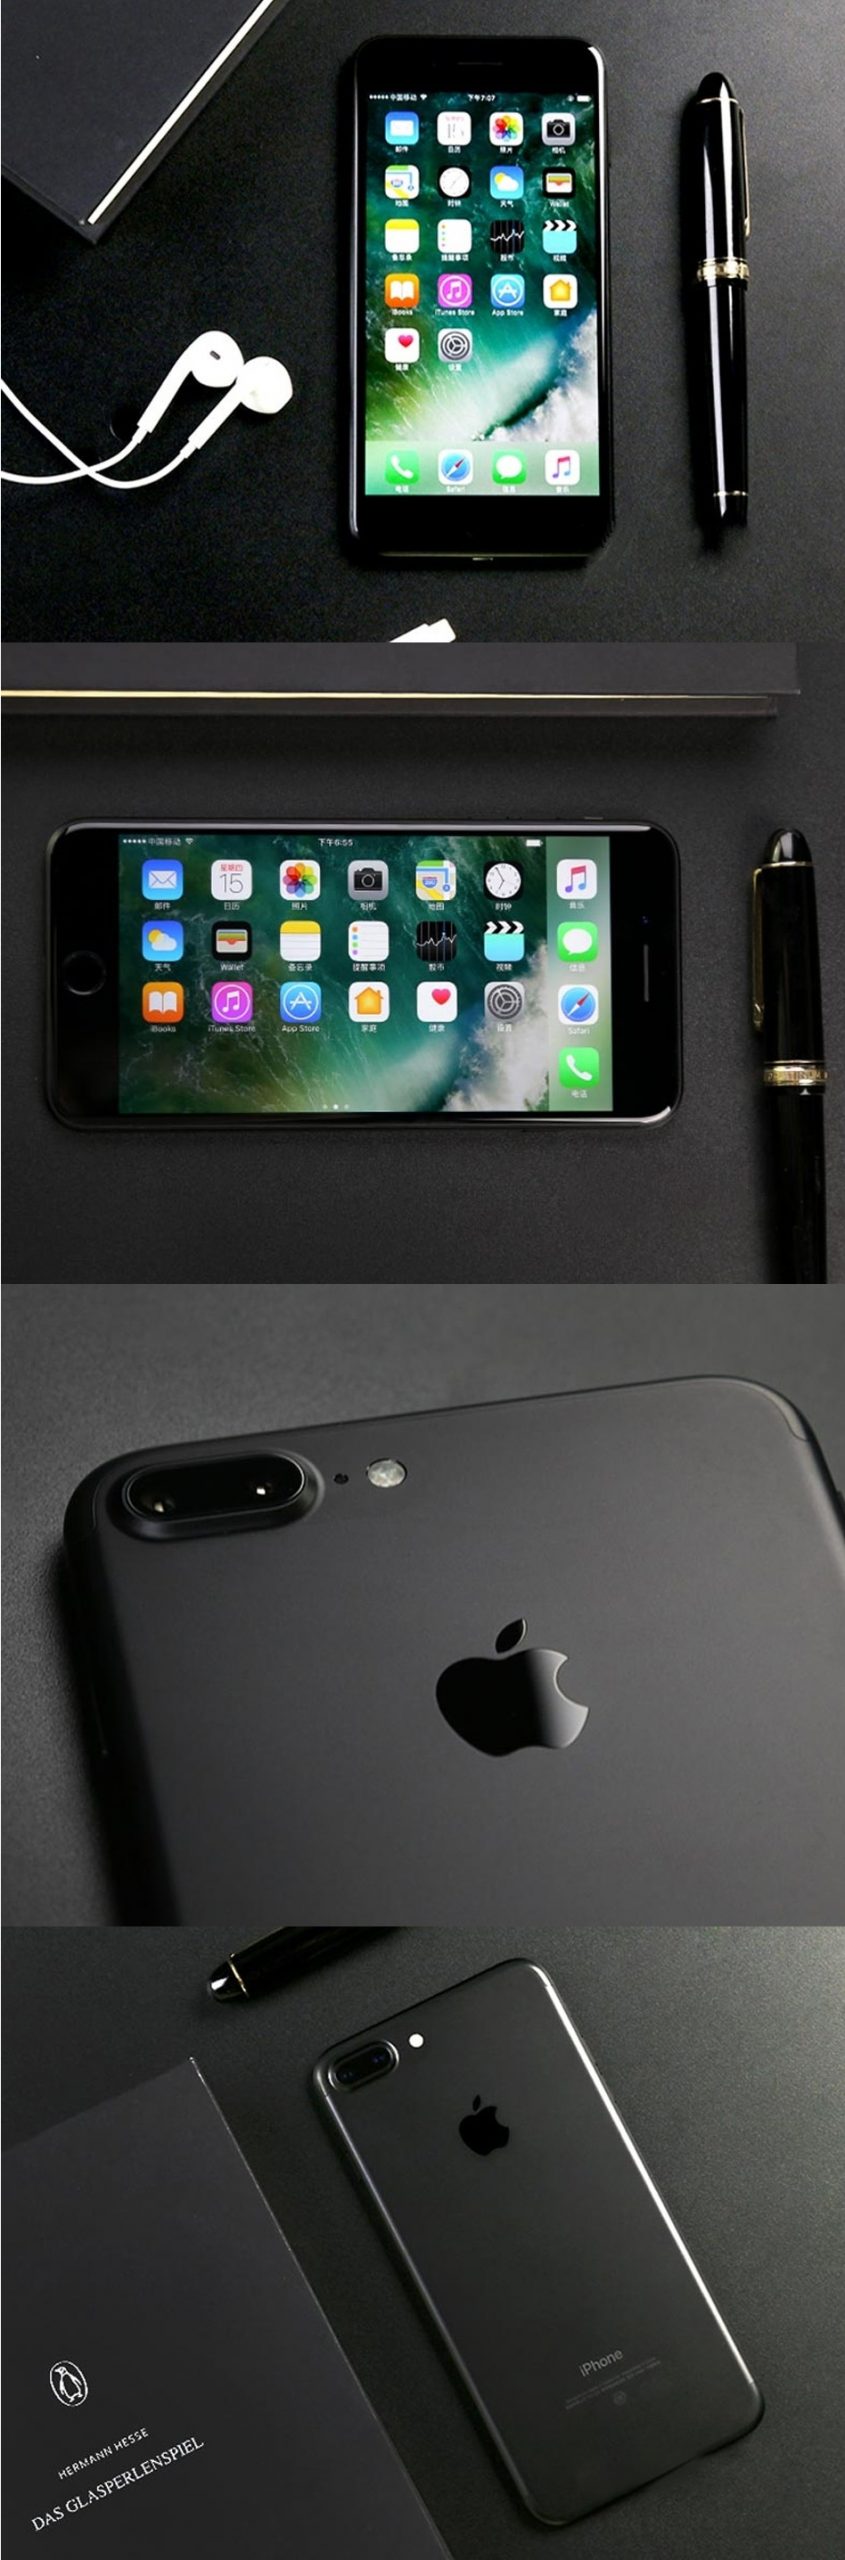 Apple iPhone 7 Plus with 3 GB RAM and 32/128/256 GB ROM